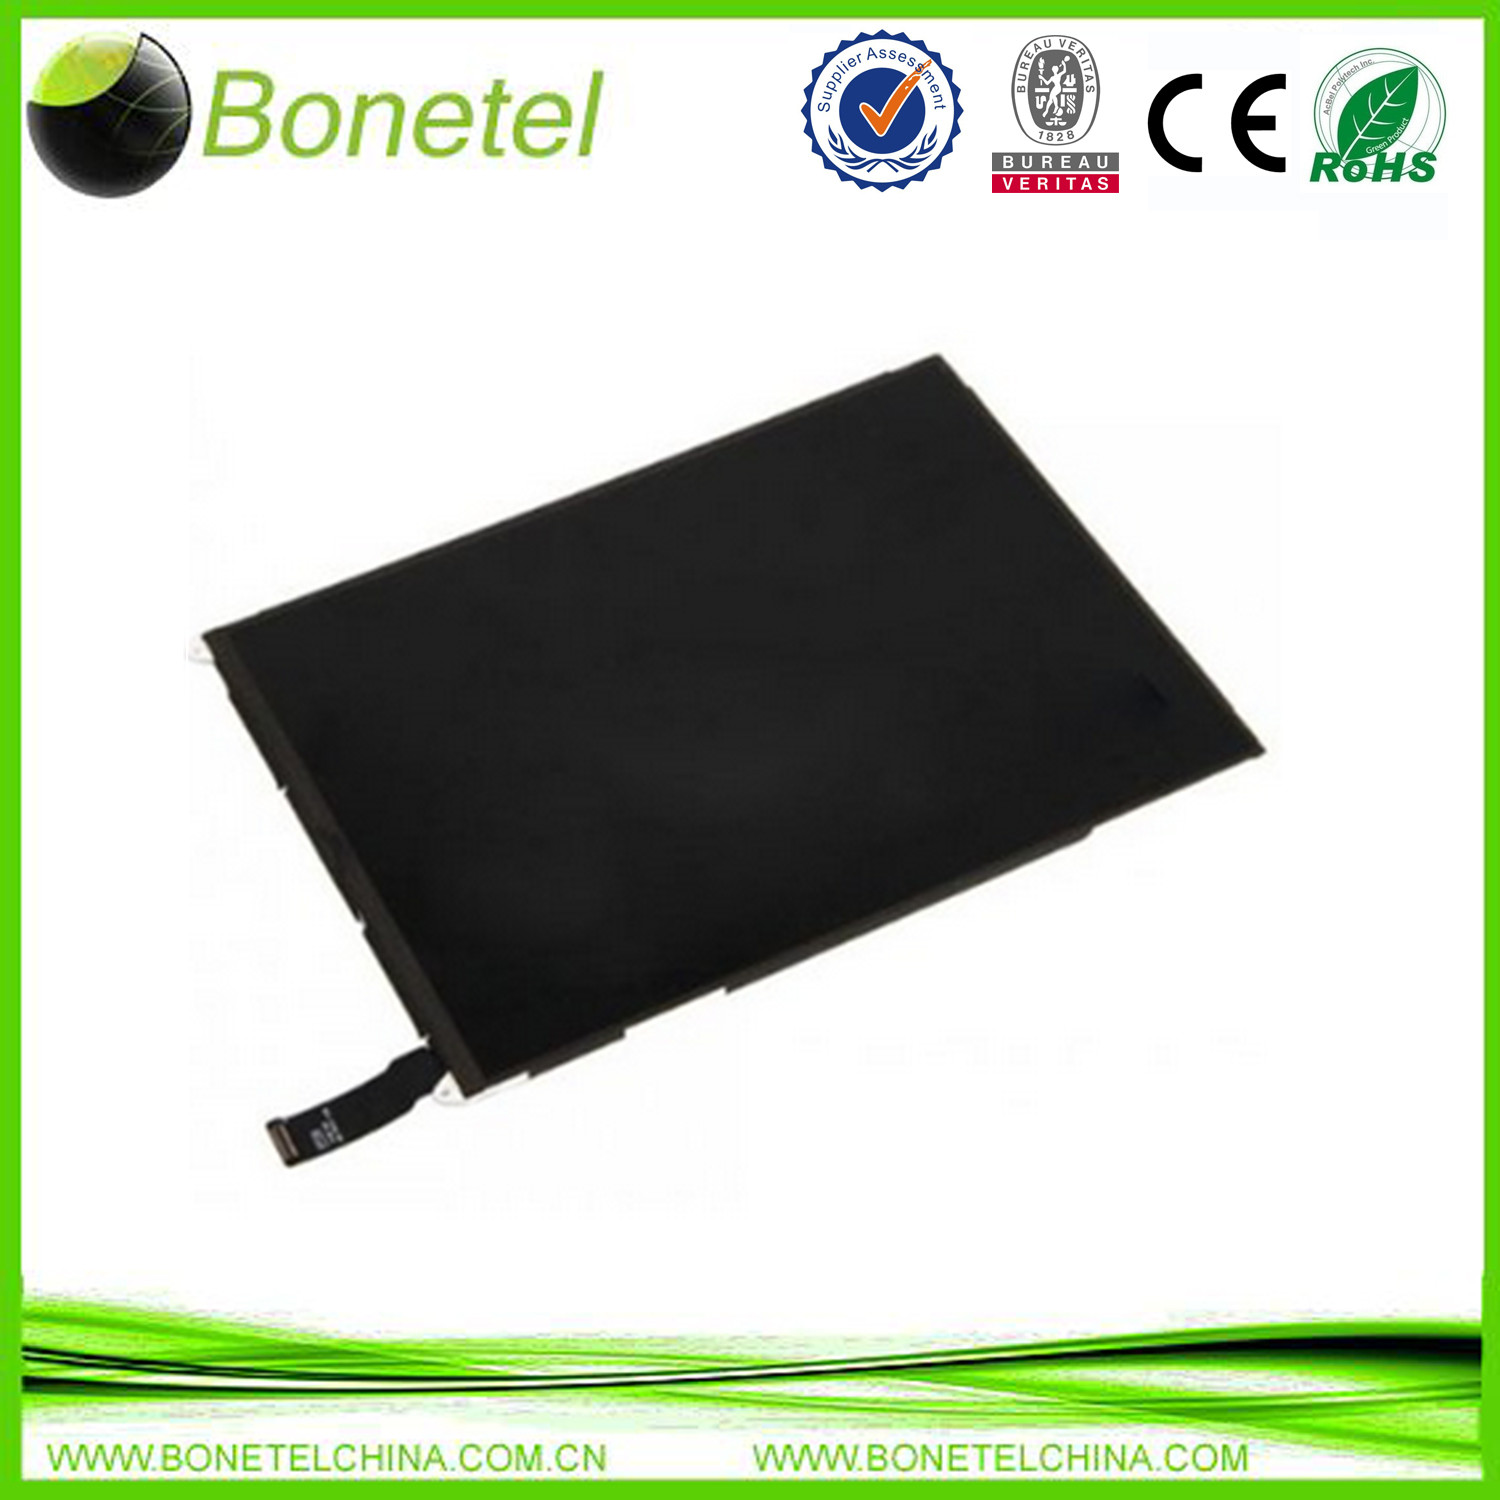 New LCD Display Screen Replacement for iPad Mini 1